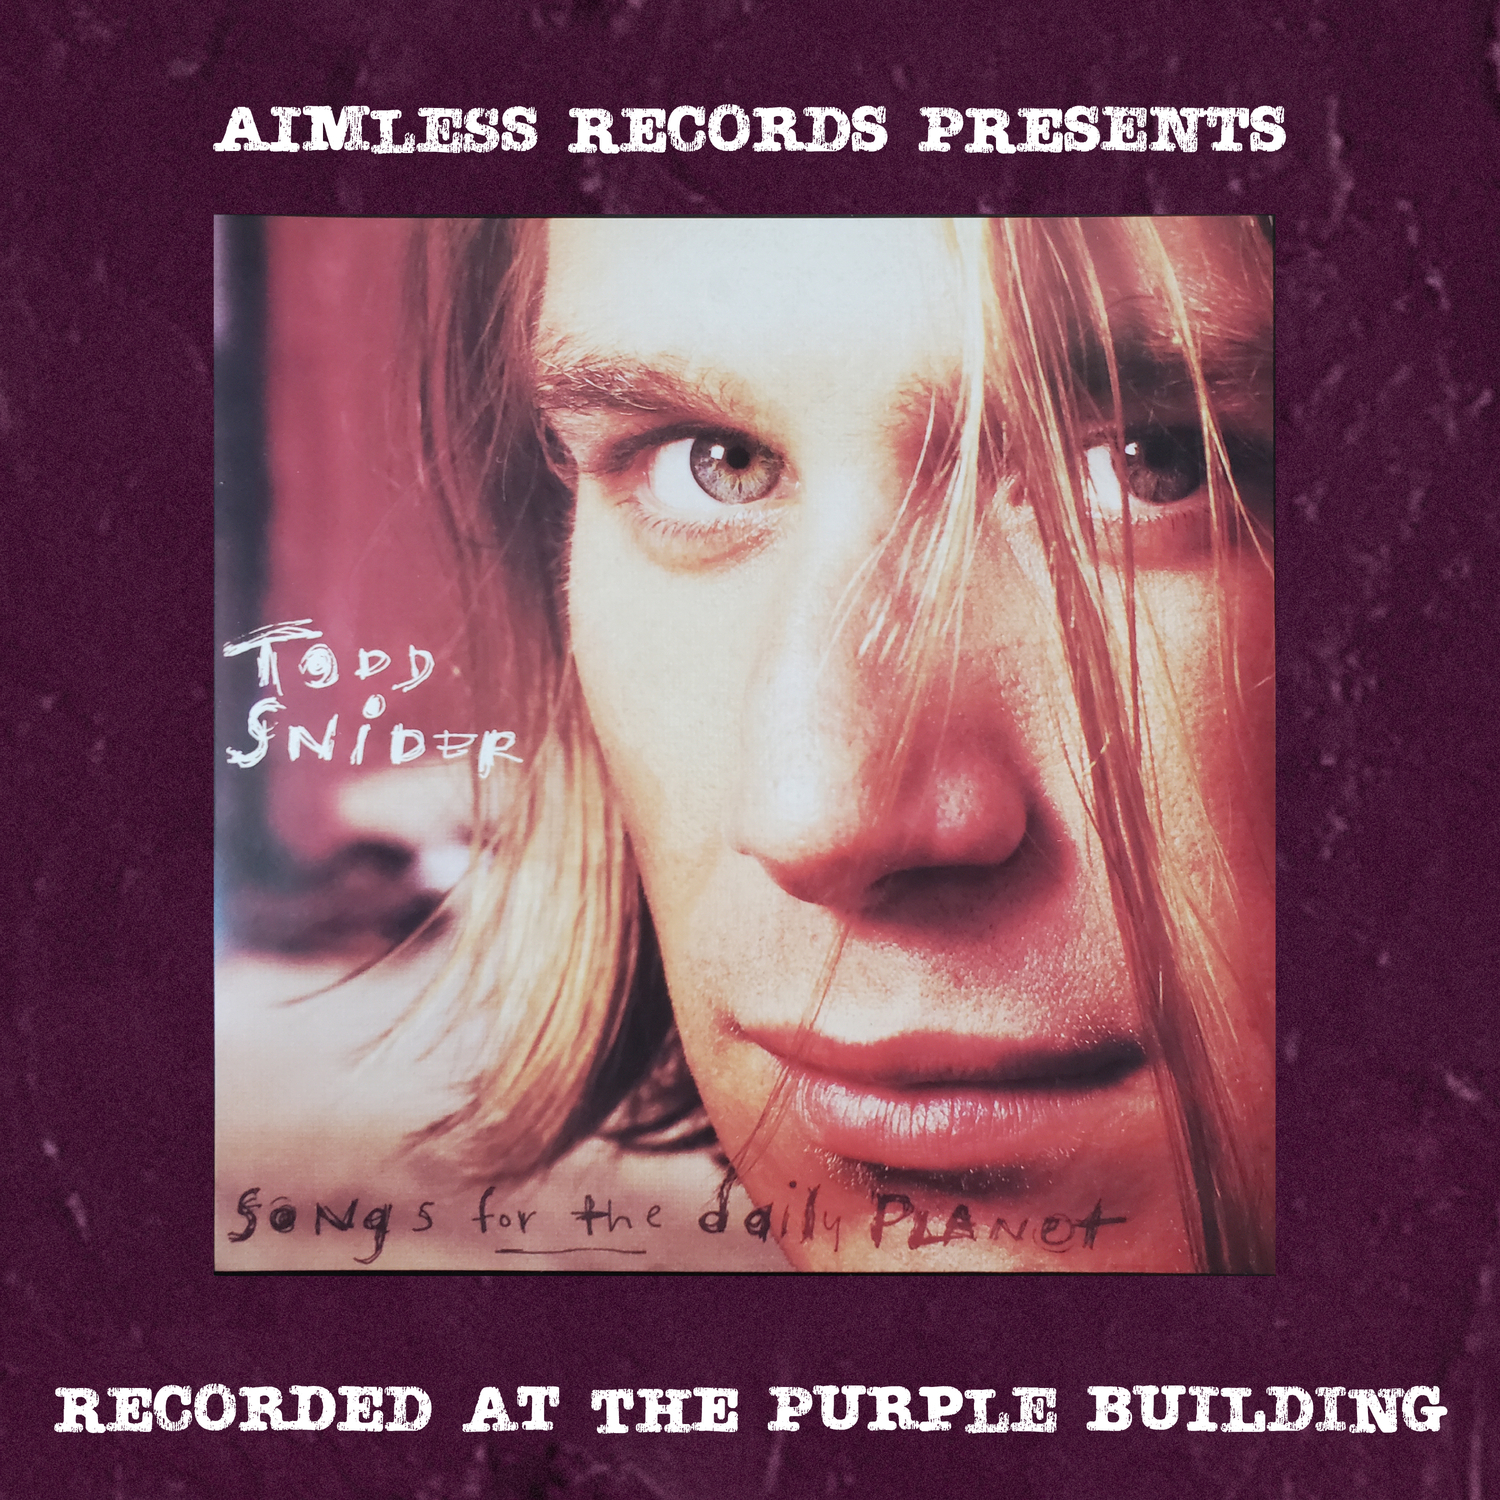 Todd Snider - 2024 - Songs For the Daily Planet (Purple Version)